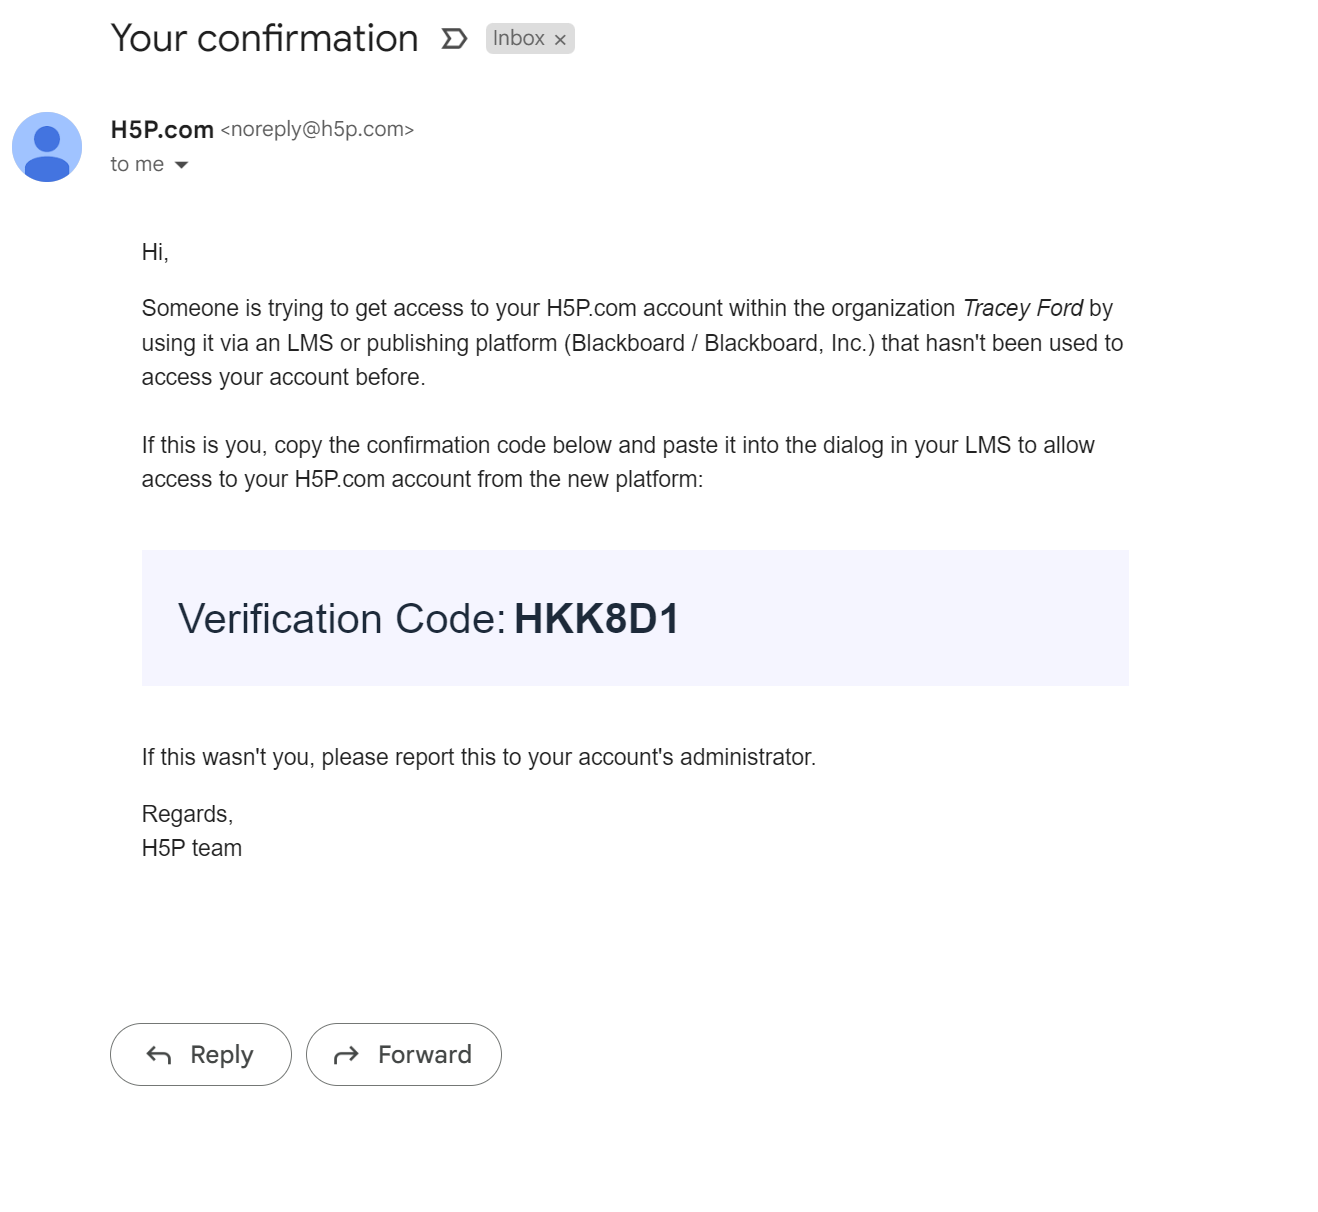 Email showing the Verification Code